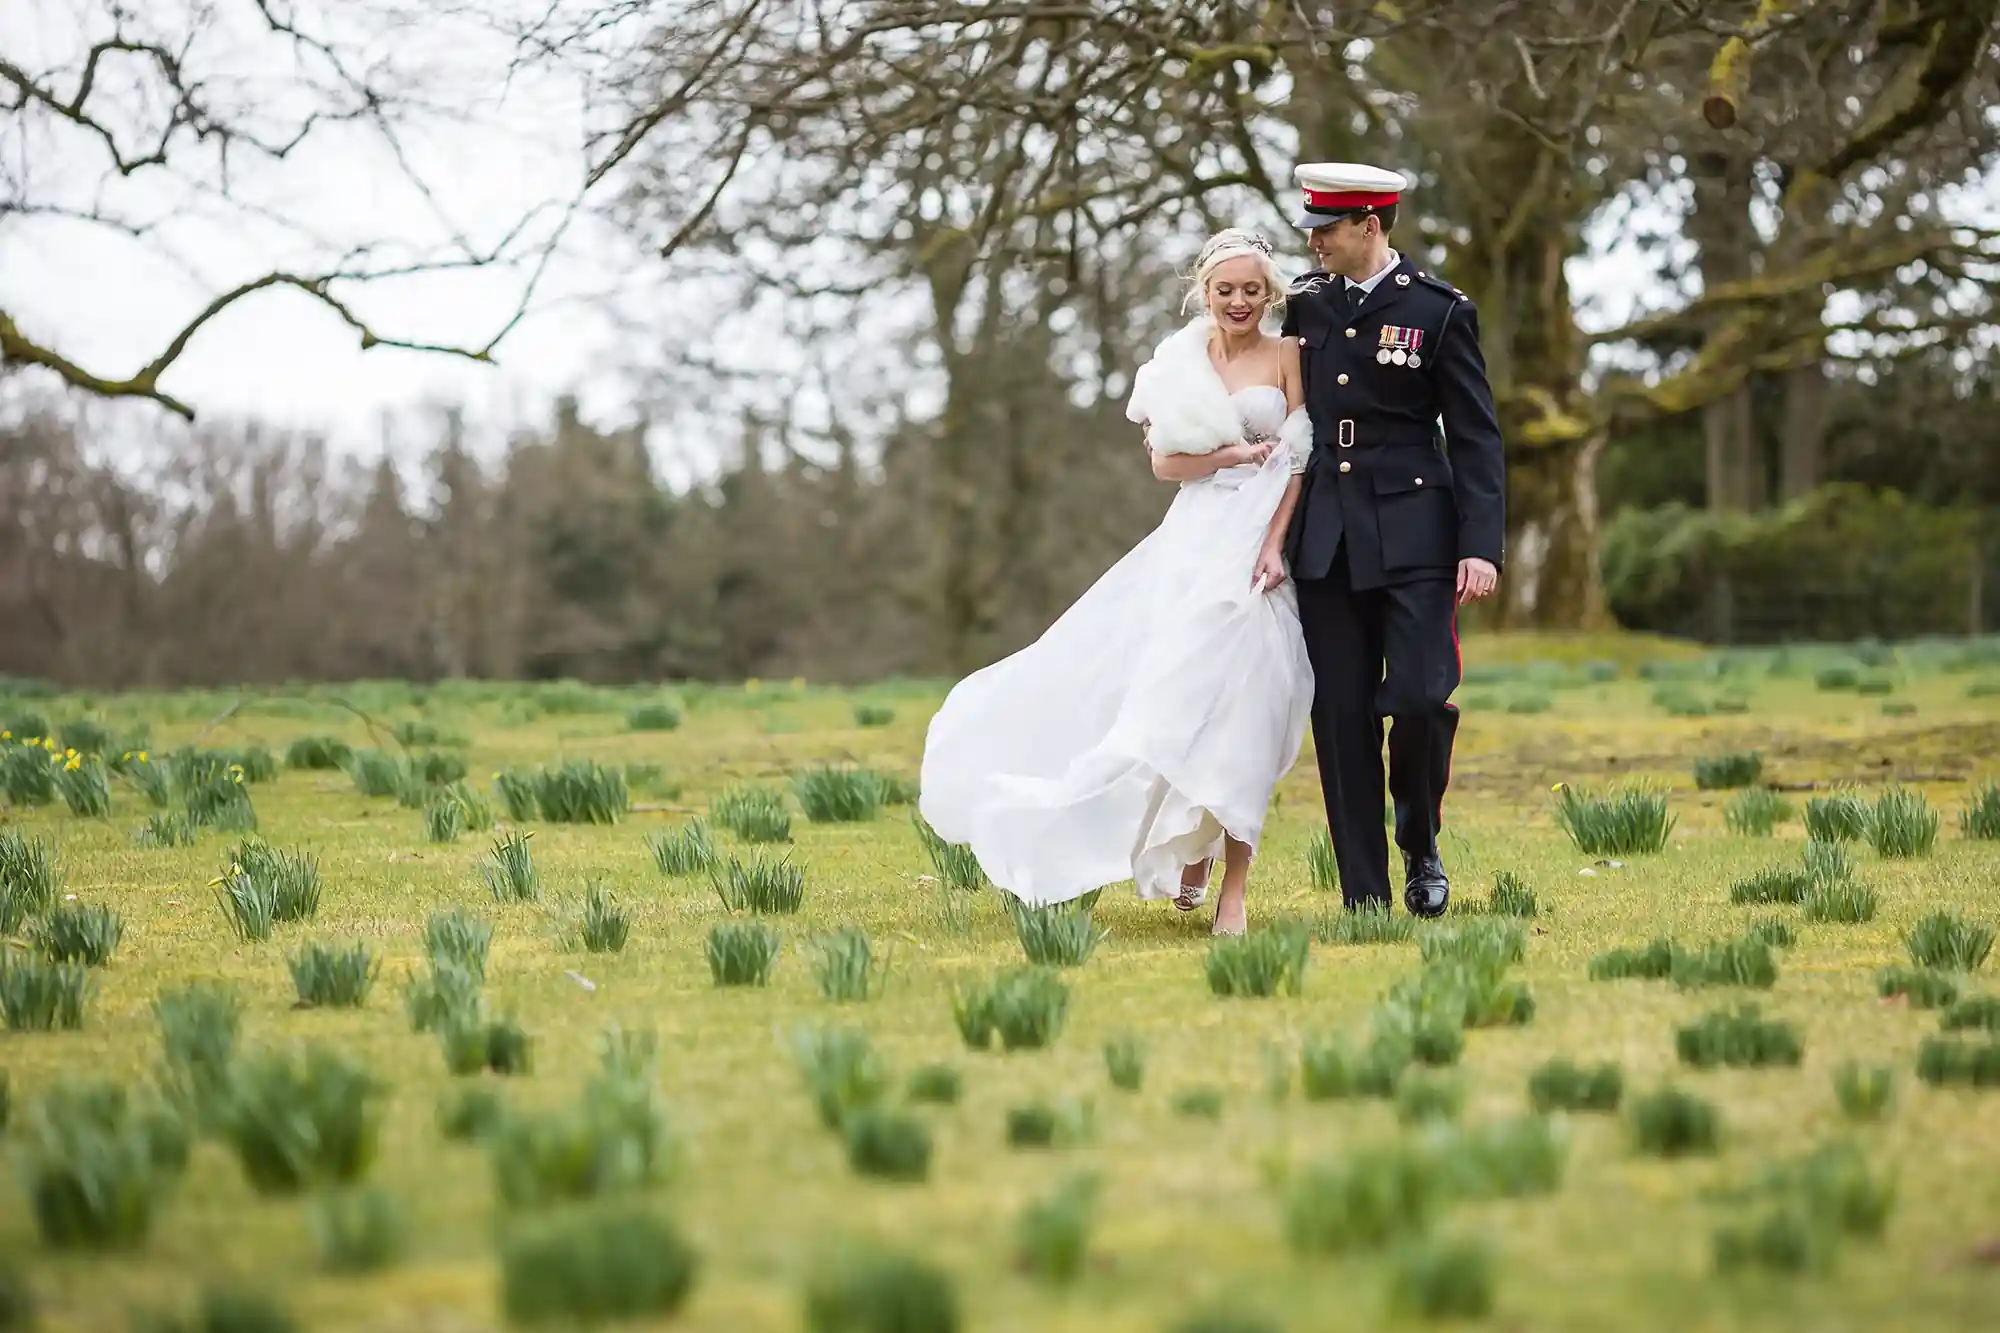 A bride in a white dress and a groom in military uniform walking hand-in-hand through a field with young green plants, with trees in the background.